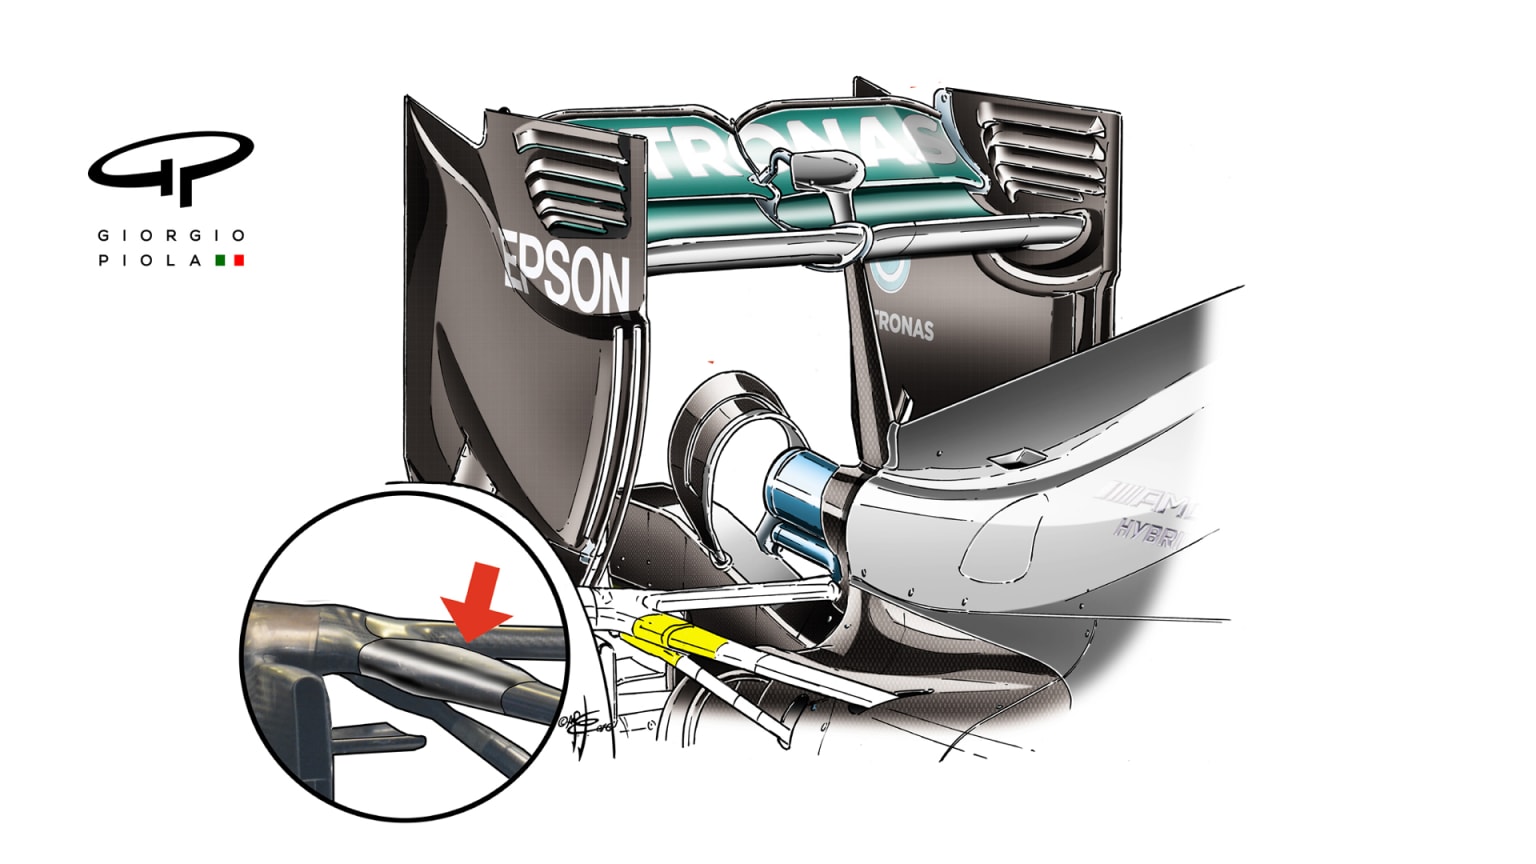 Tech insight - Mercedes' strengthened rear suspension